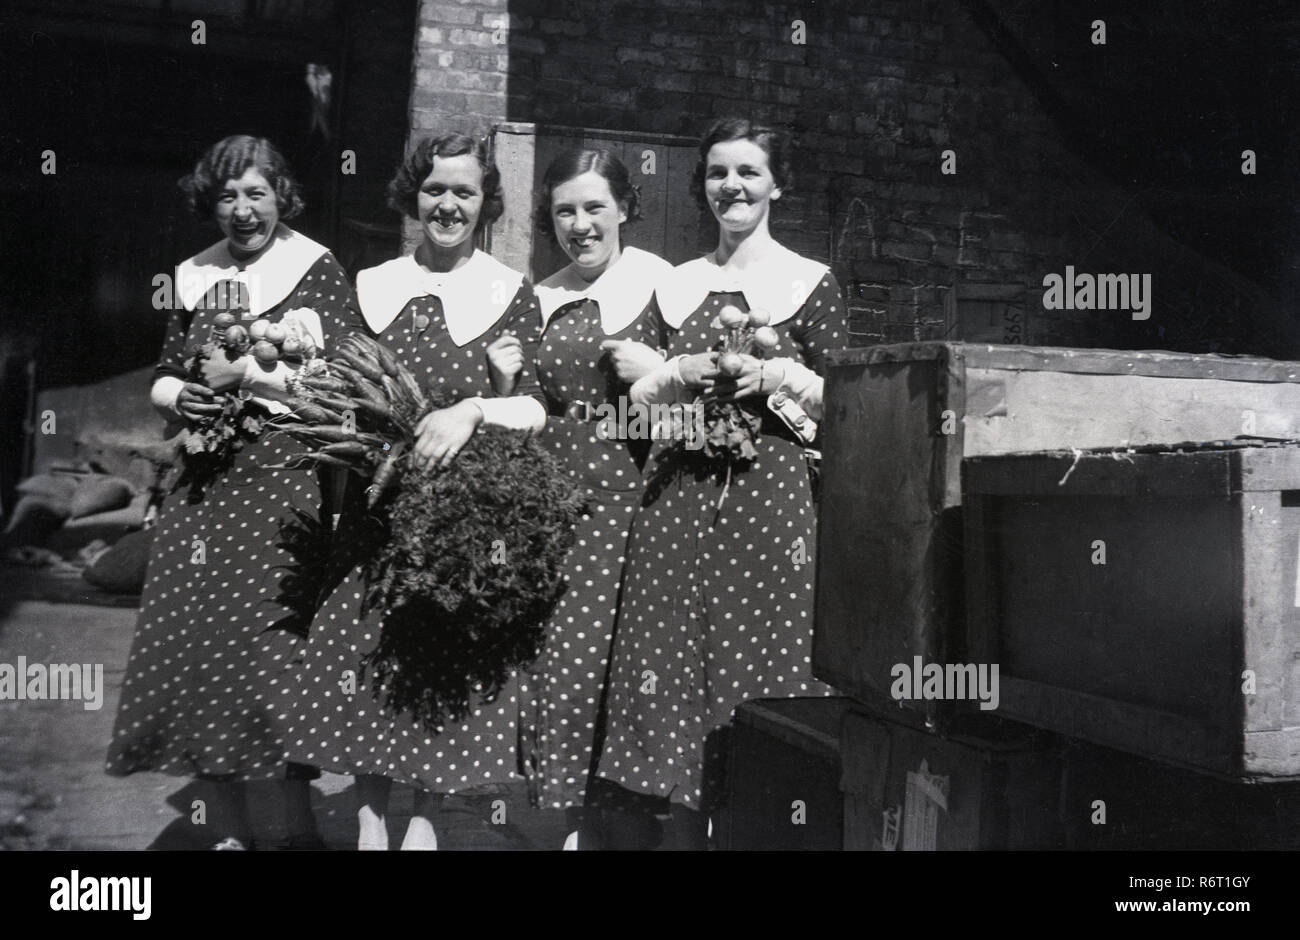 1930s, historical, four ladies dressed in the fashionable, popular female clothes of the day, polka dot or spotted dresses with white collars, holding dried flowers, England, UK. Stock Photo